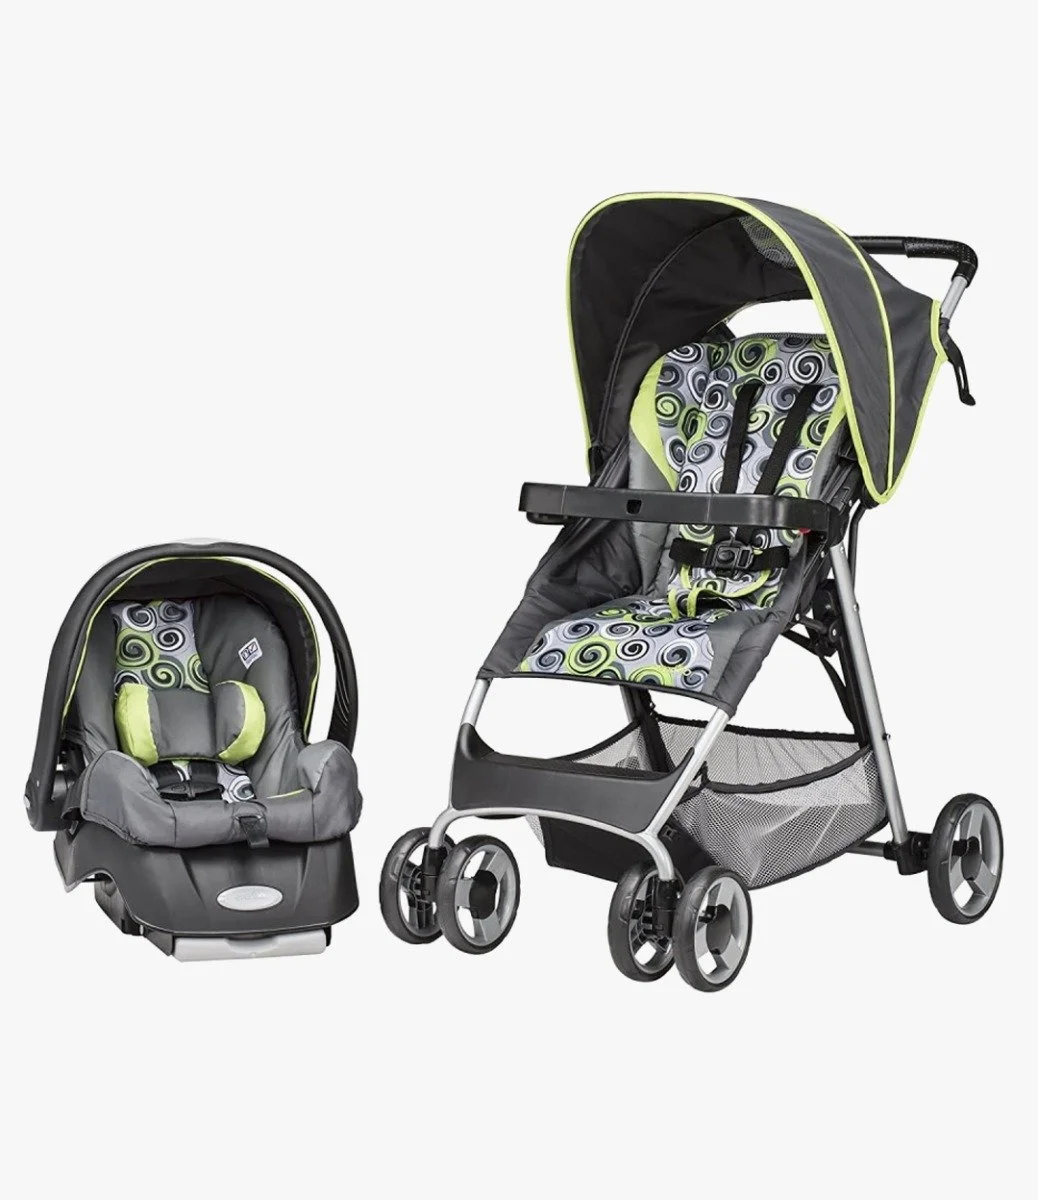 Green Evenflo FlexLite Travel System Stroller and Car Seat 